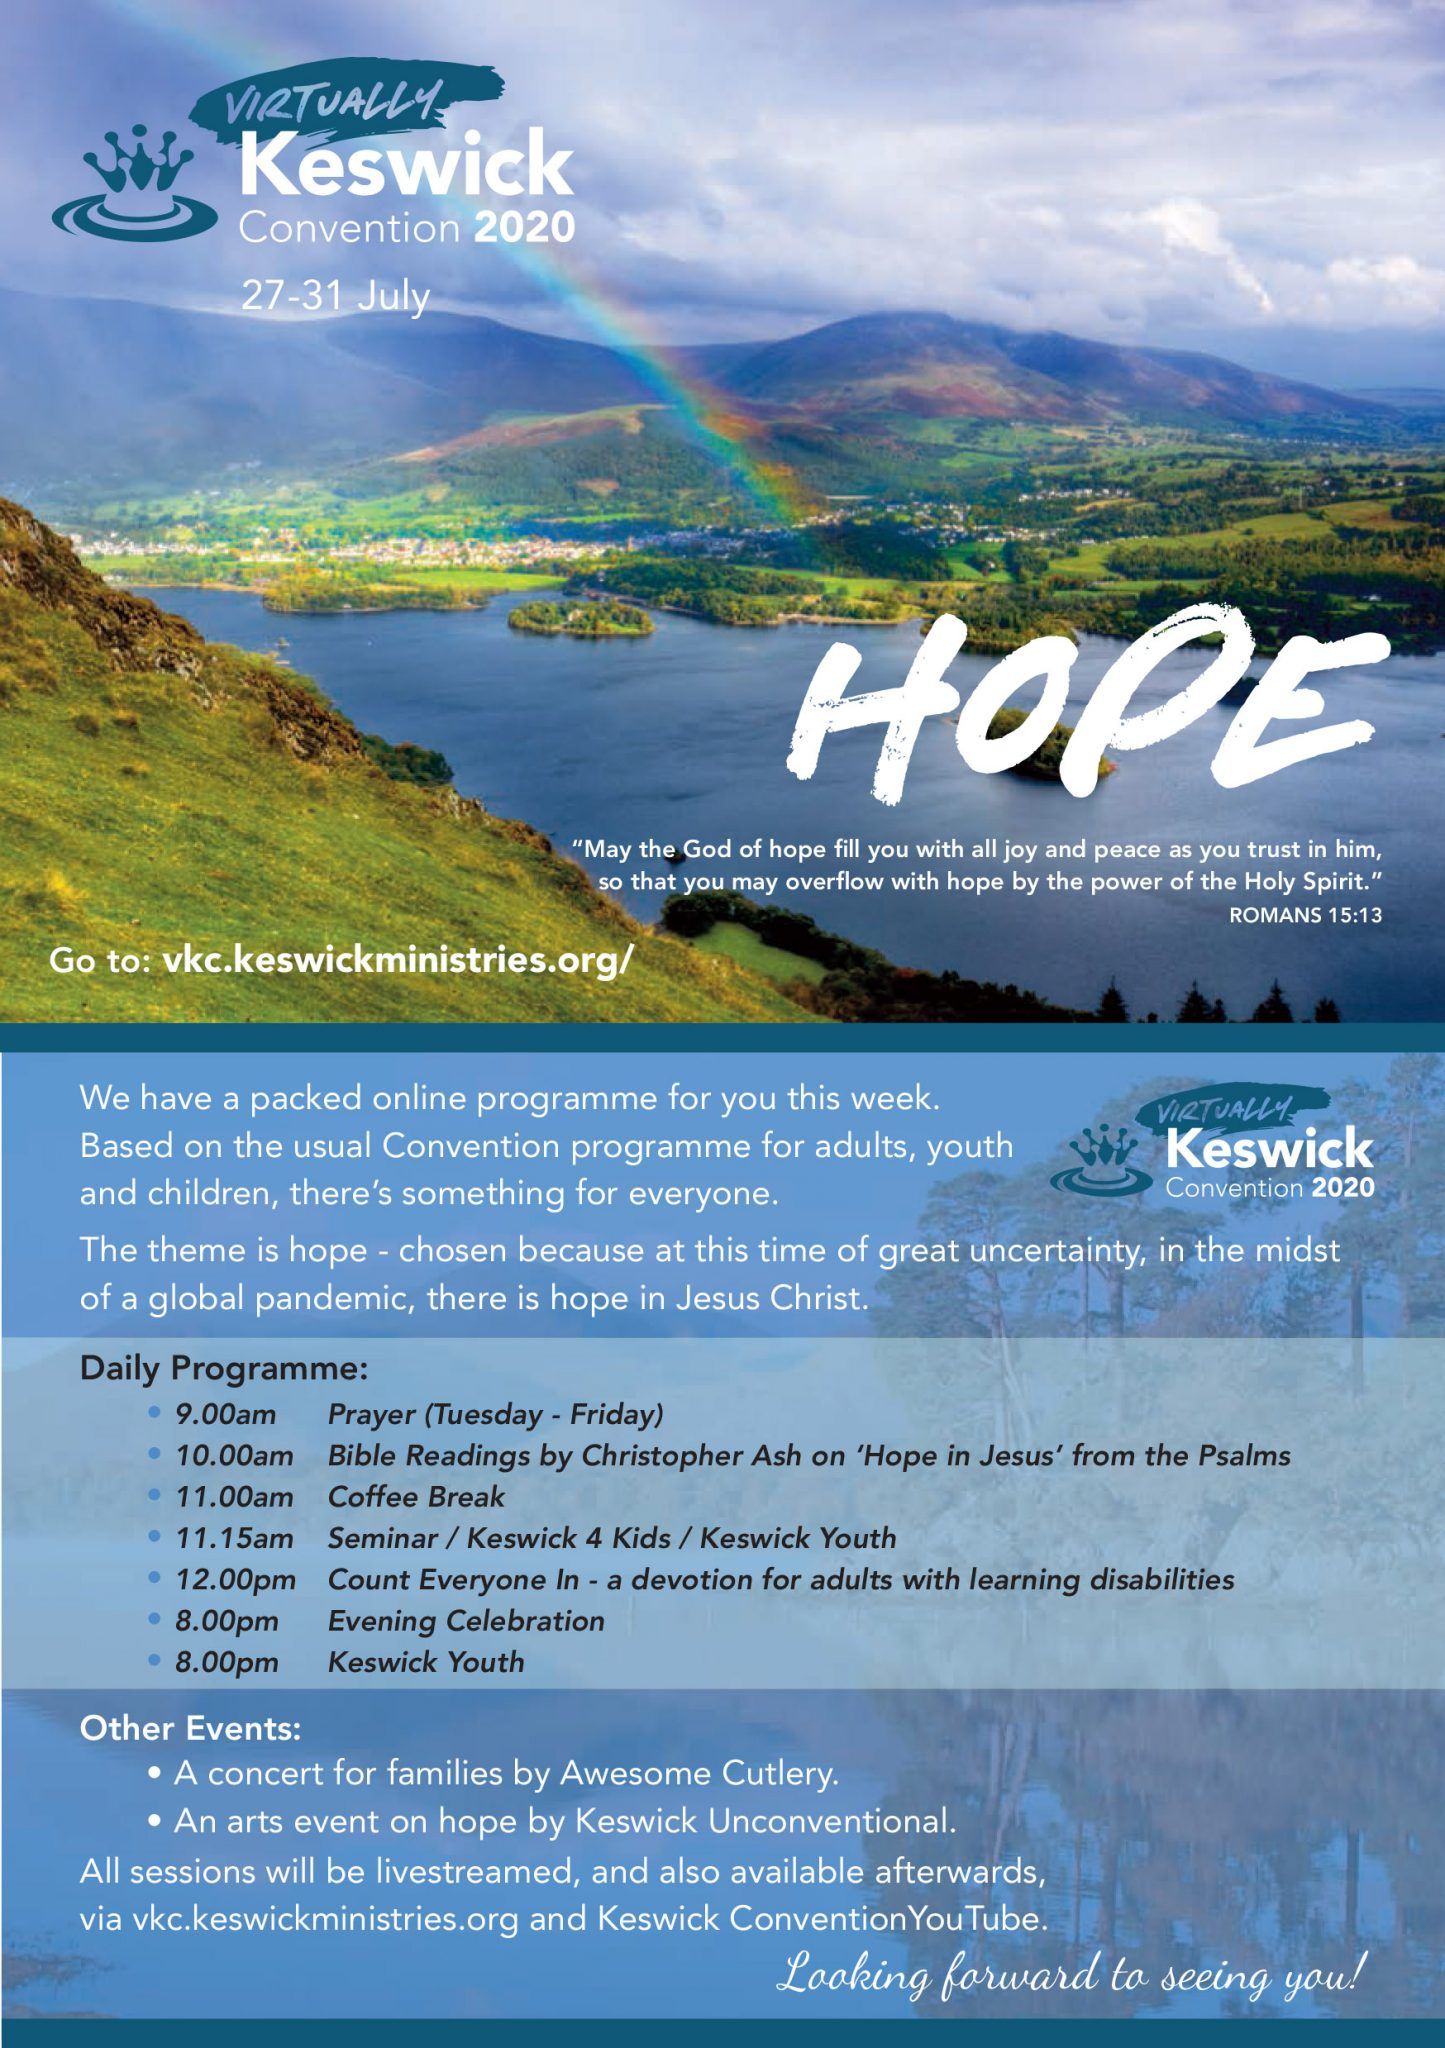 Share the Virtually Keswick Convention programme with friends & family